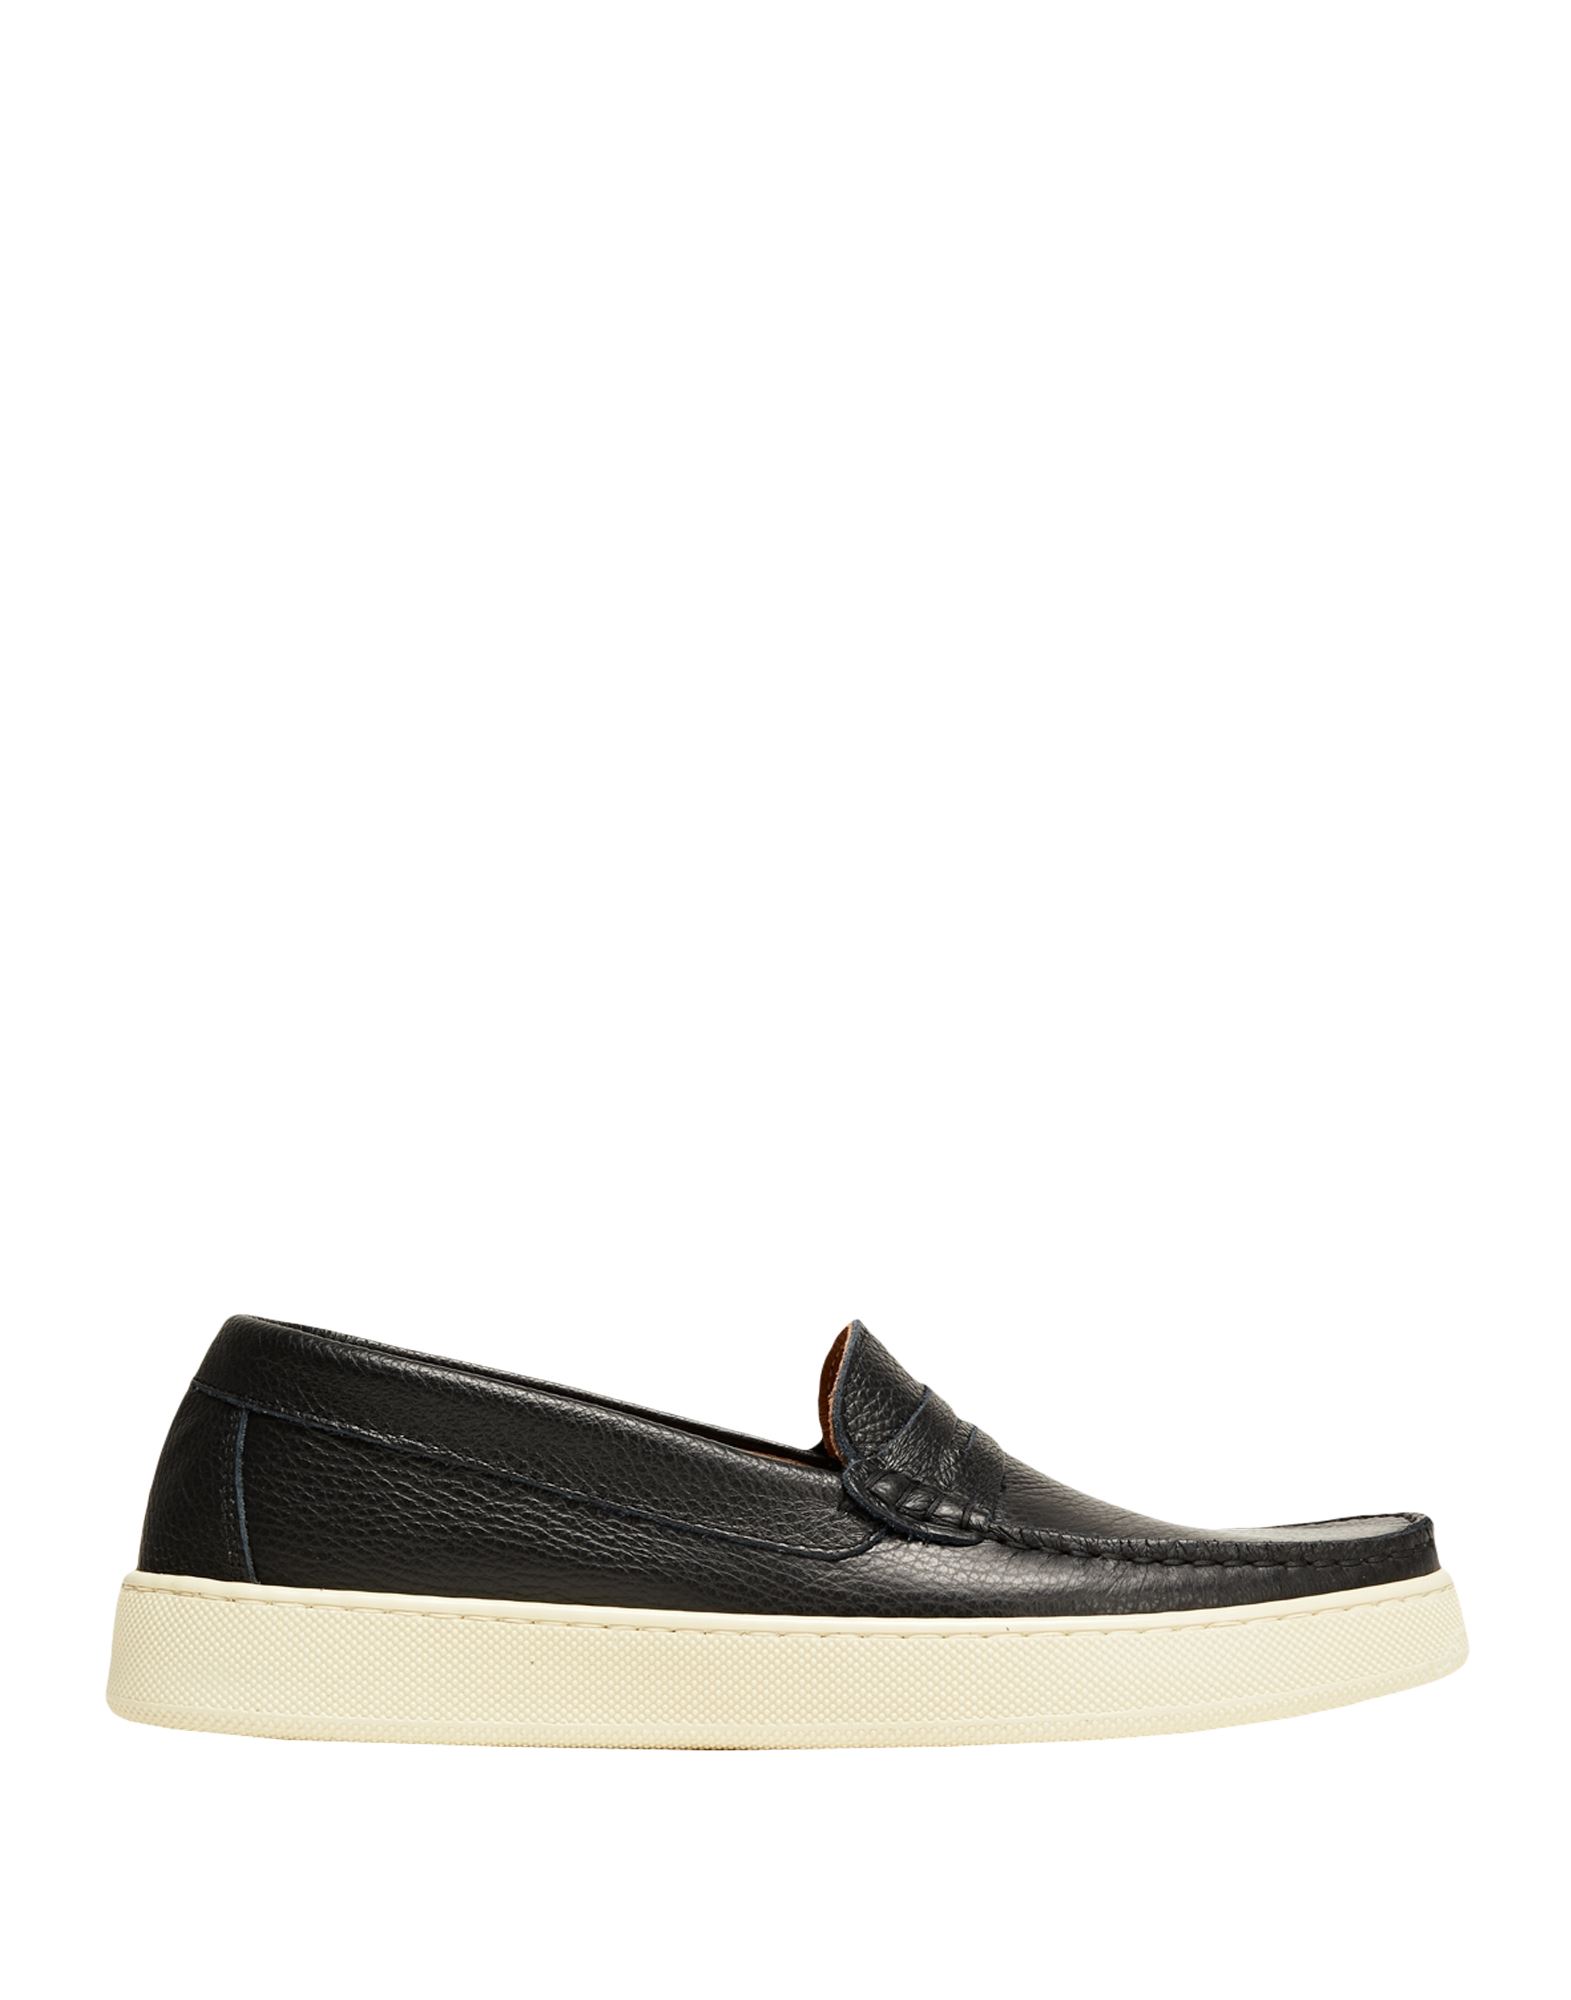 8 by YOOX メンズ モカシン DRUMMED LEATHER SLIP-ON LOAFER ブラック